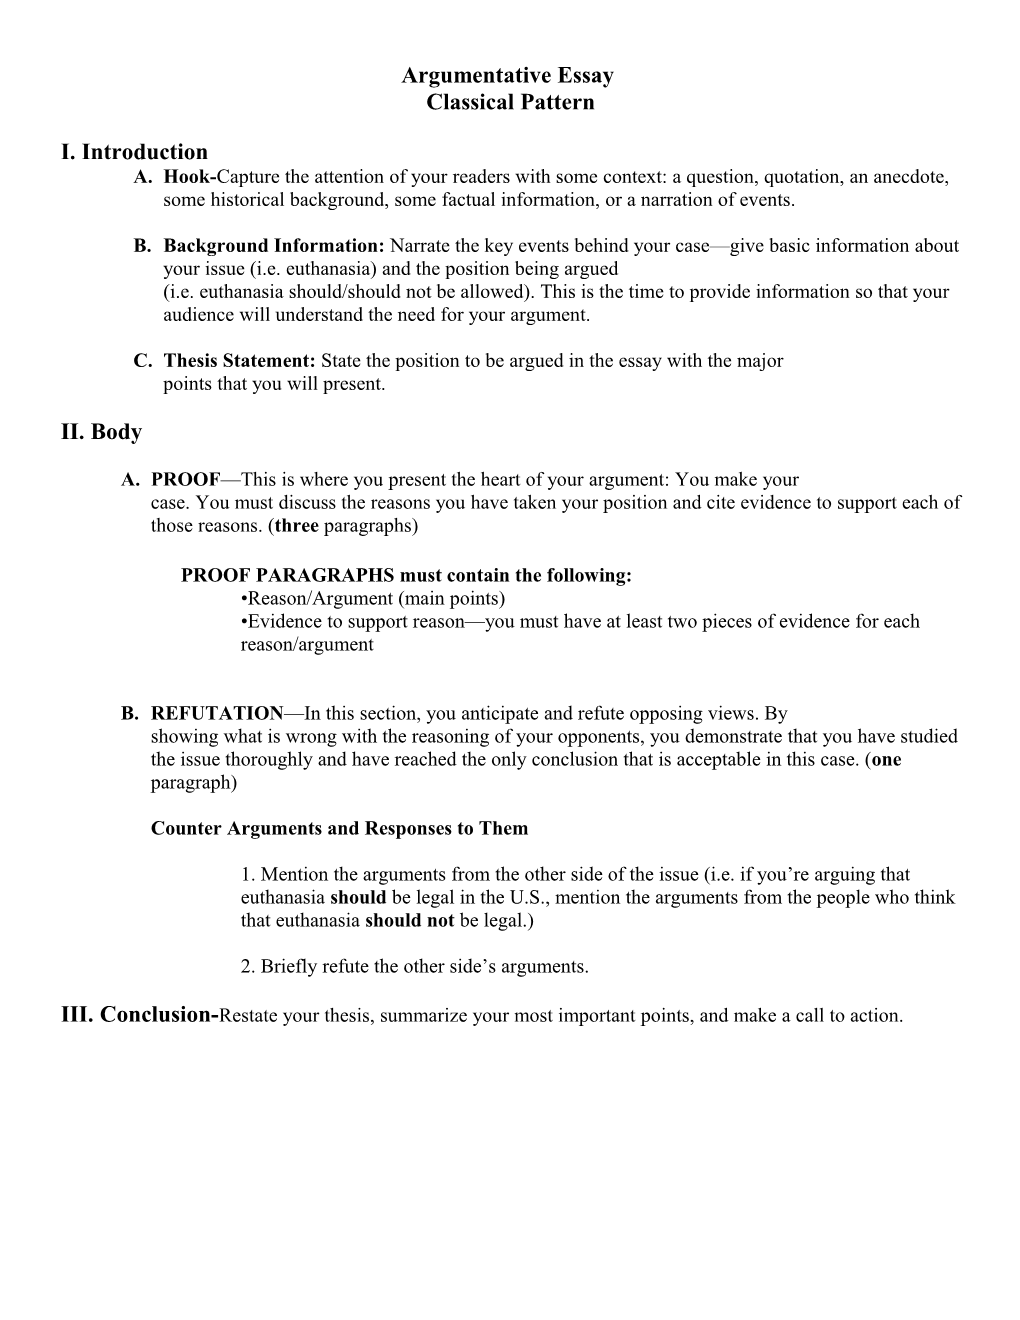 Outline of an Argumentative Essay Classical Pattern